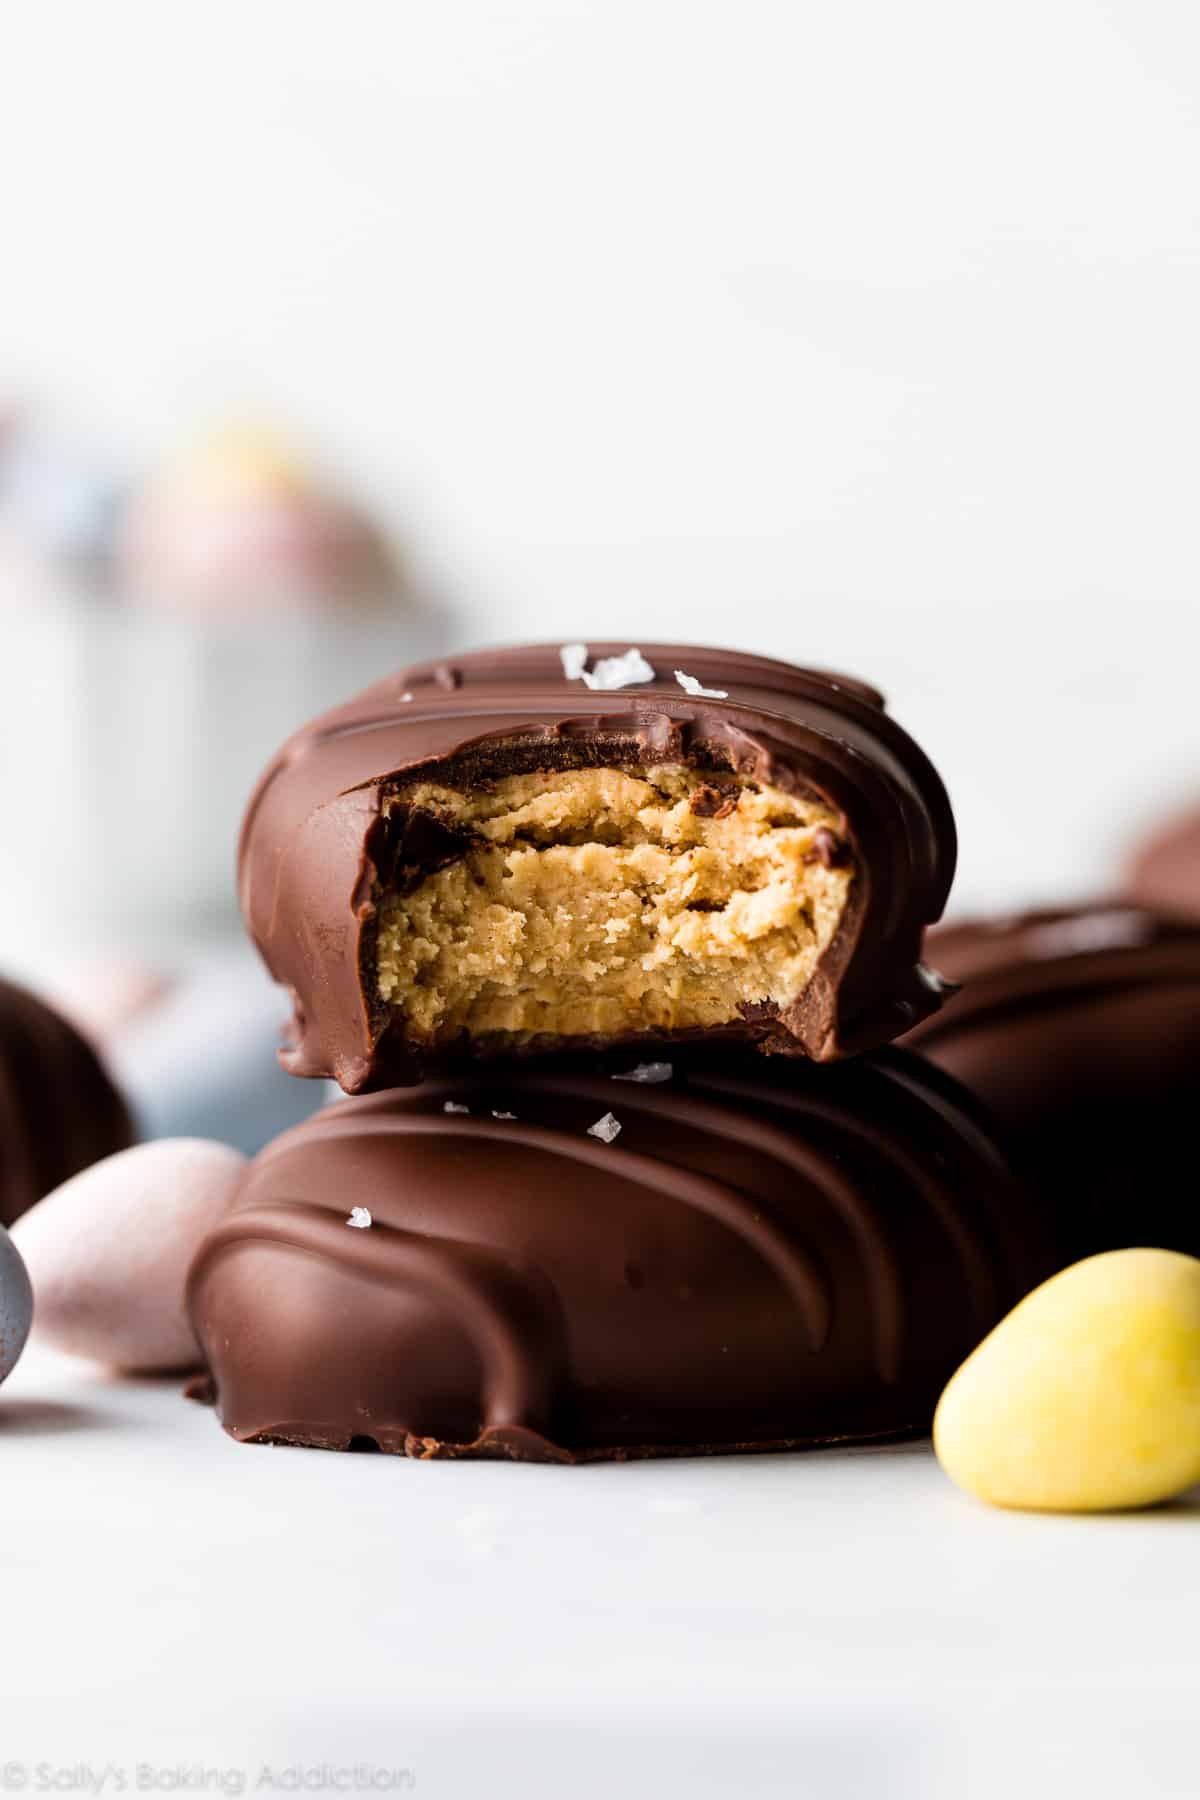 peanut butter egg candy with bite taken out to show filling